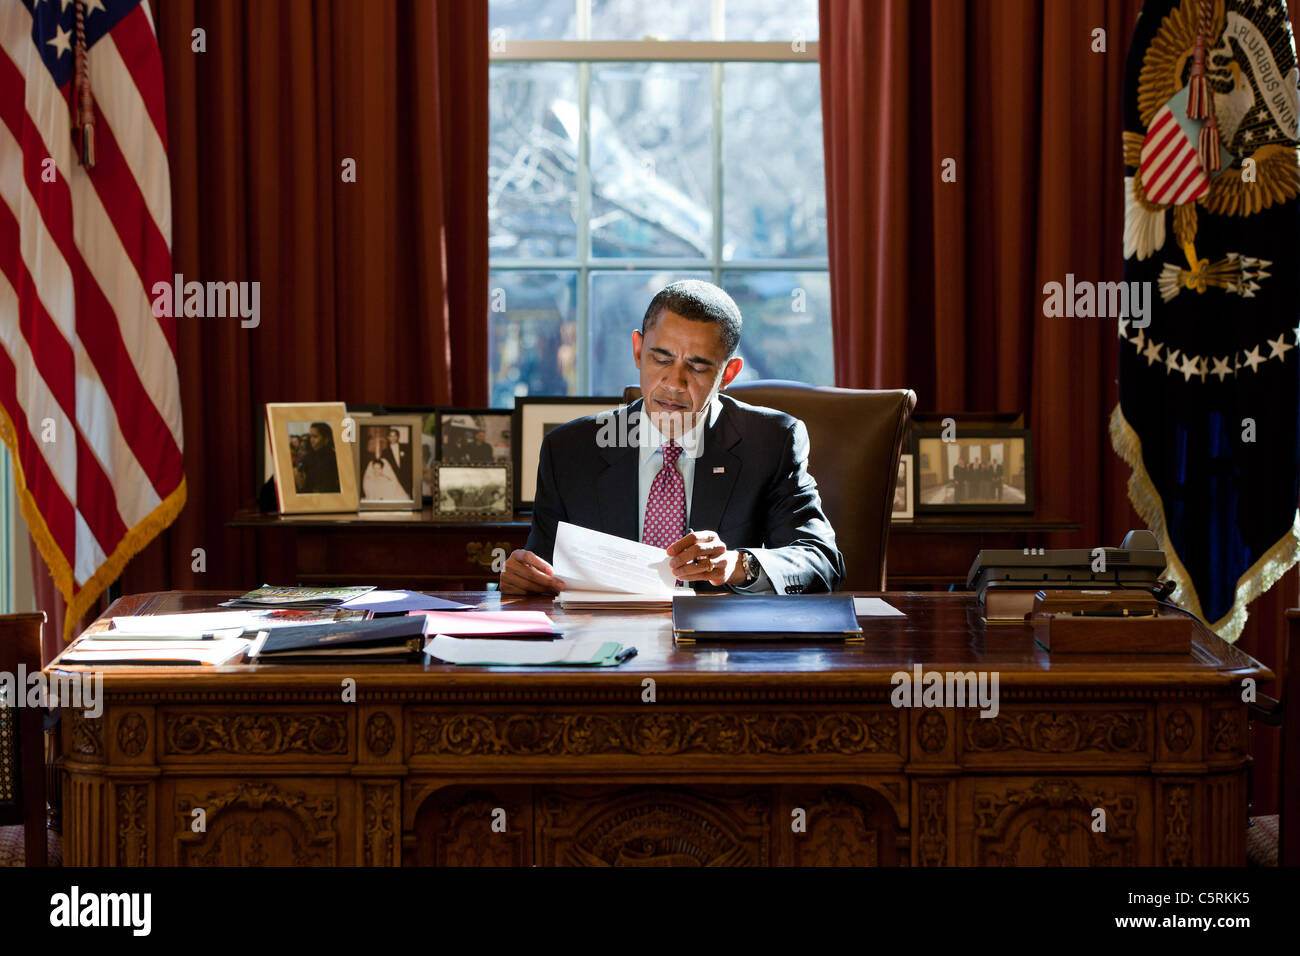 President Barack Obama reviews his prepared remarks on Egypt at the Resolute Desk in the Oval Office, Feb. 11, 2011. Stock Photo